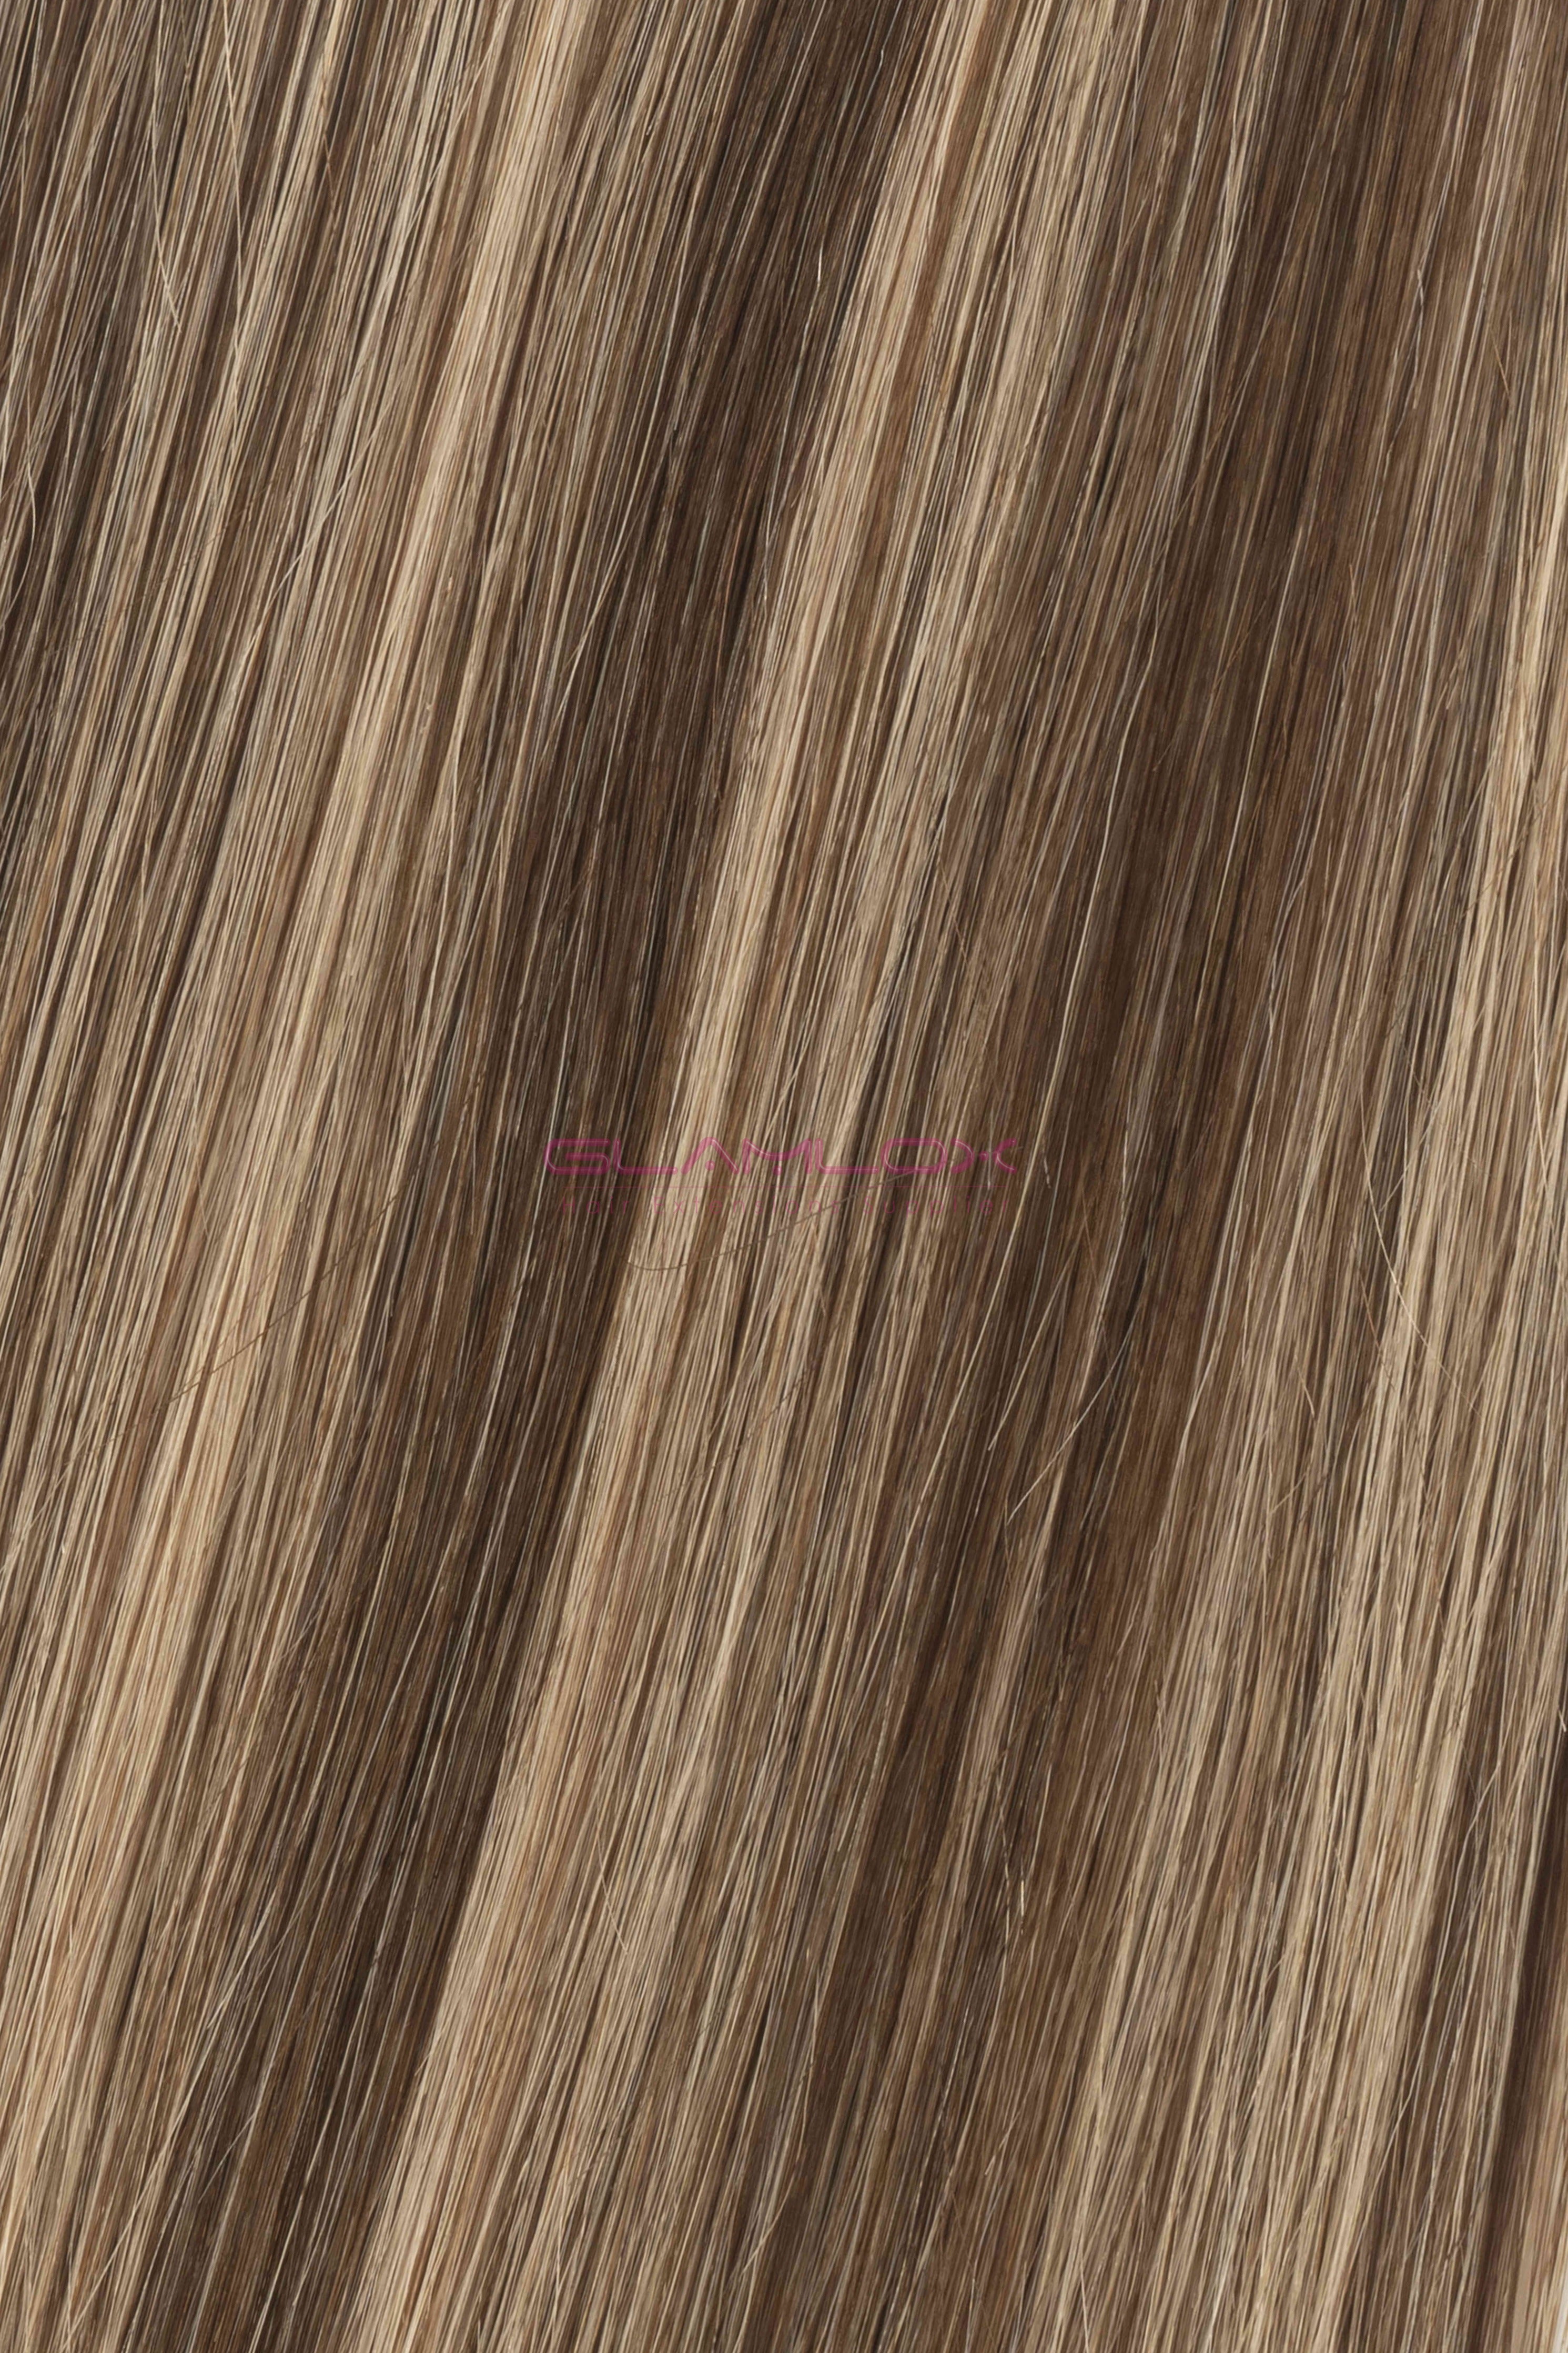 20/22" - Tape In Hair Extensions - Russian Mongolian Double Drawn Remy Human Hair Extensions